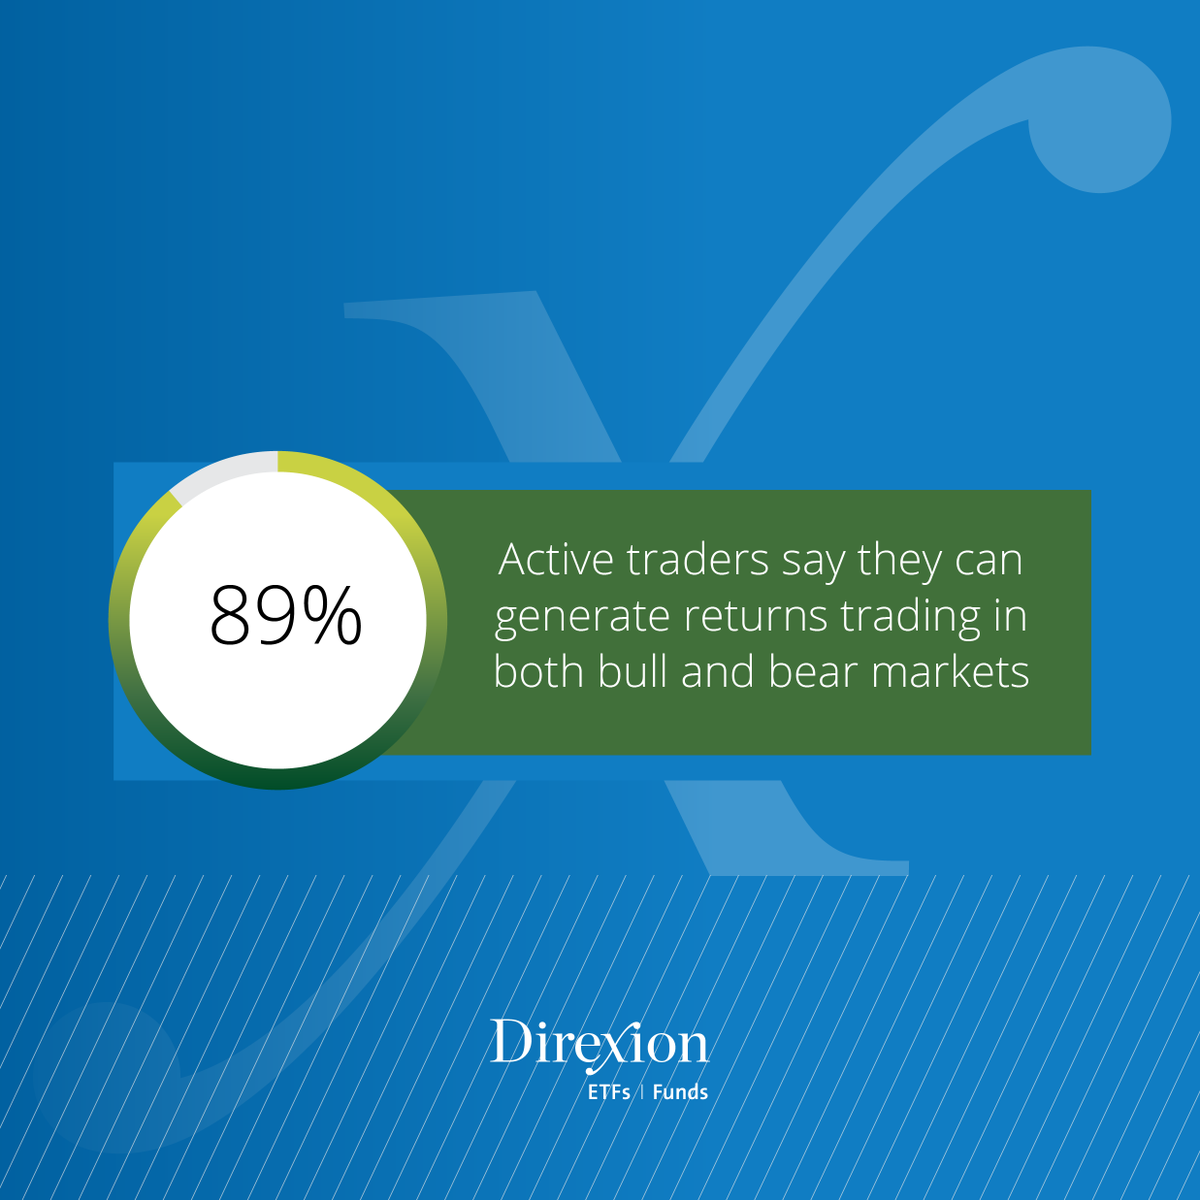 When making informed decisions regarding trading ETFs, 82% of active traders were very or moderately confident, and 89% believed they could make money in both bull and bear markets Direxion Trader Sentiment Survey ➡️ trib.al/LsDS0Rz #ActiveTrader #Survey #Report #ETF